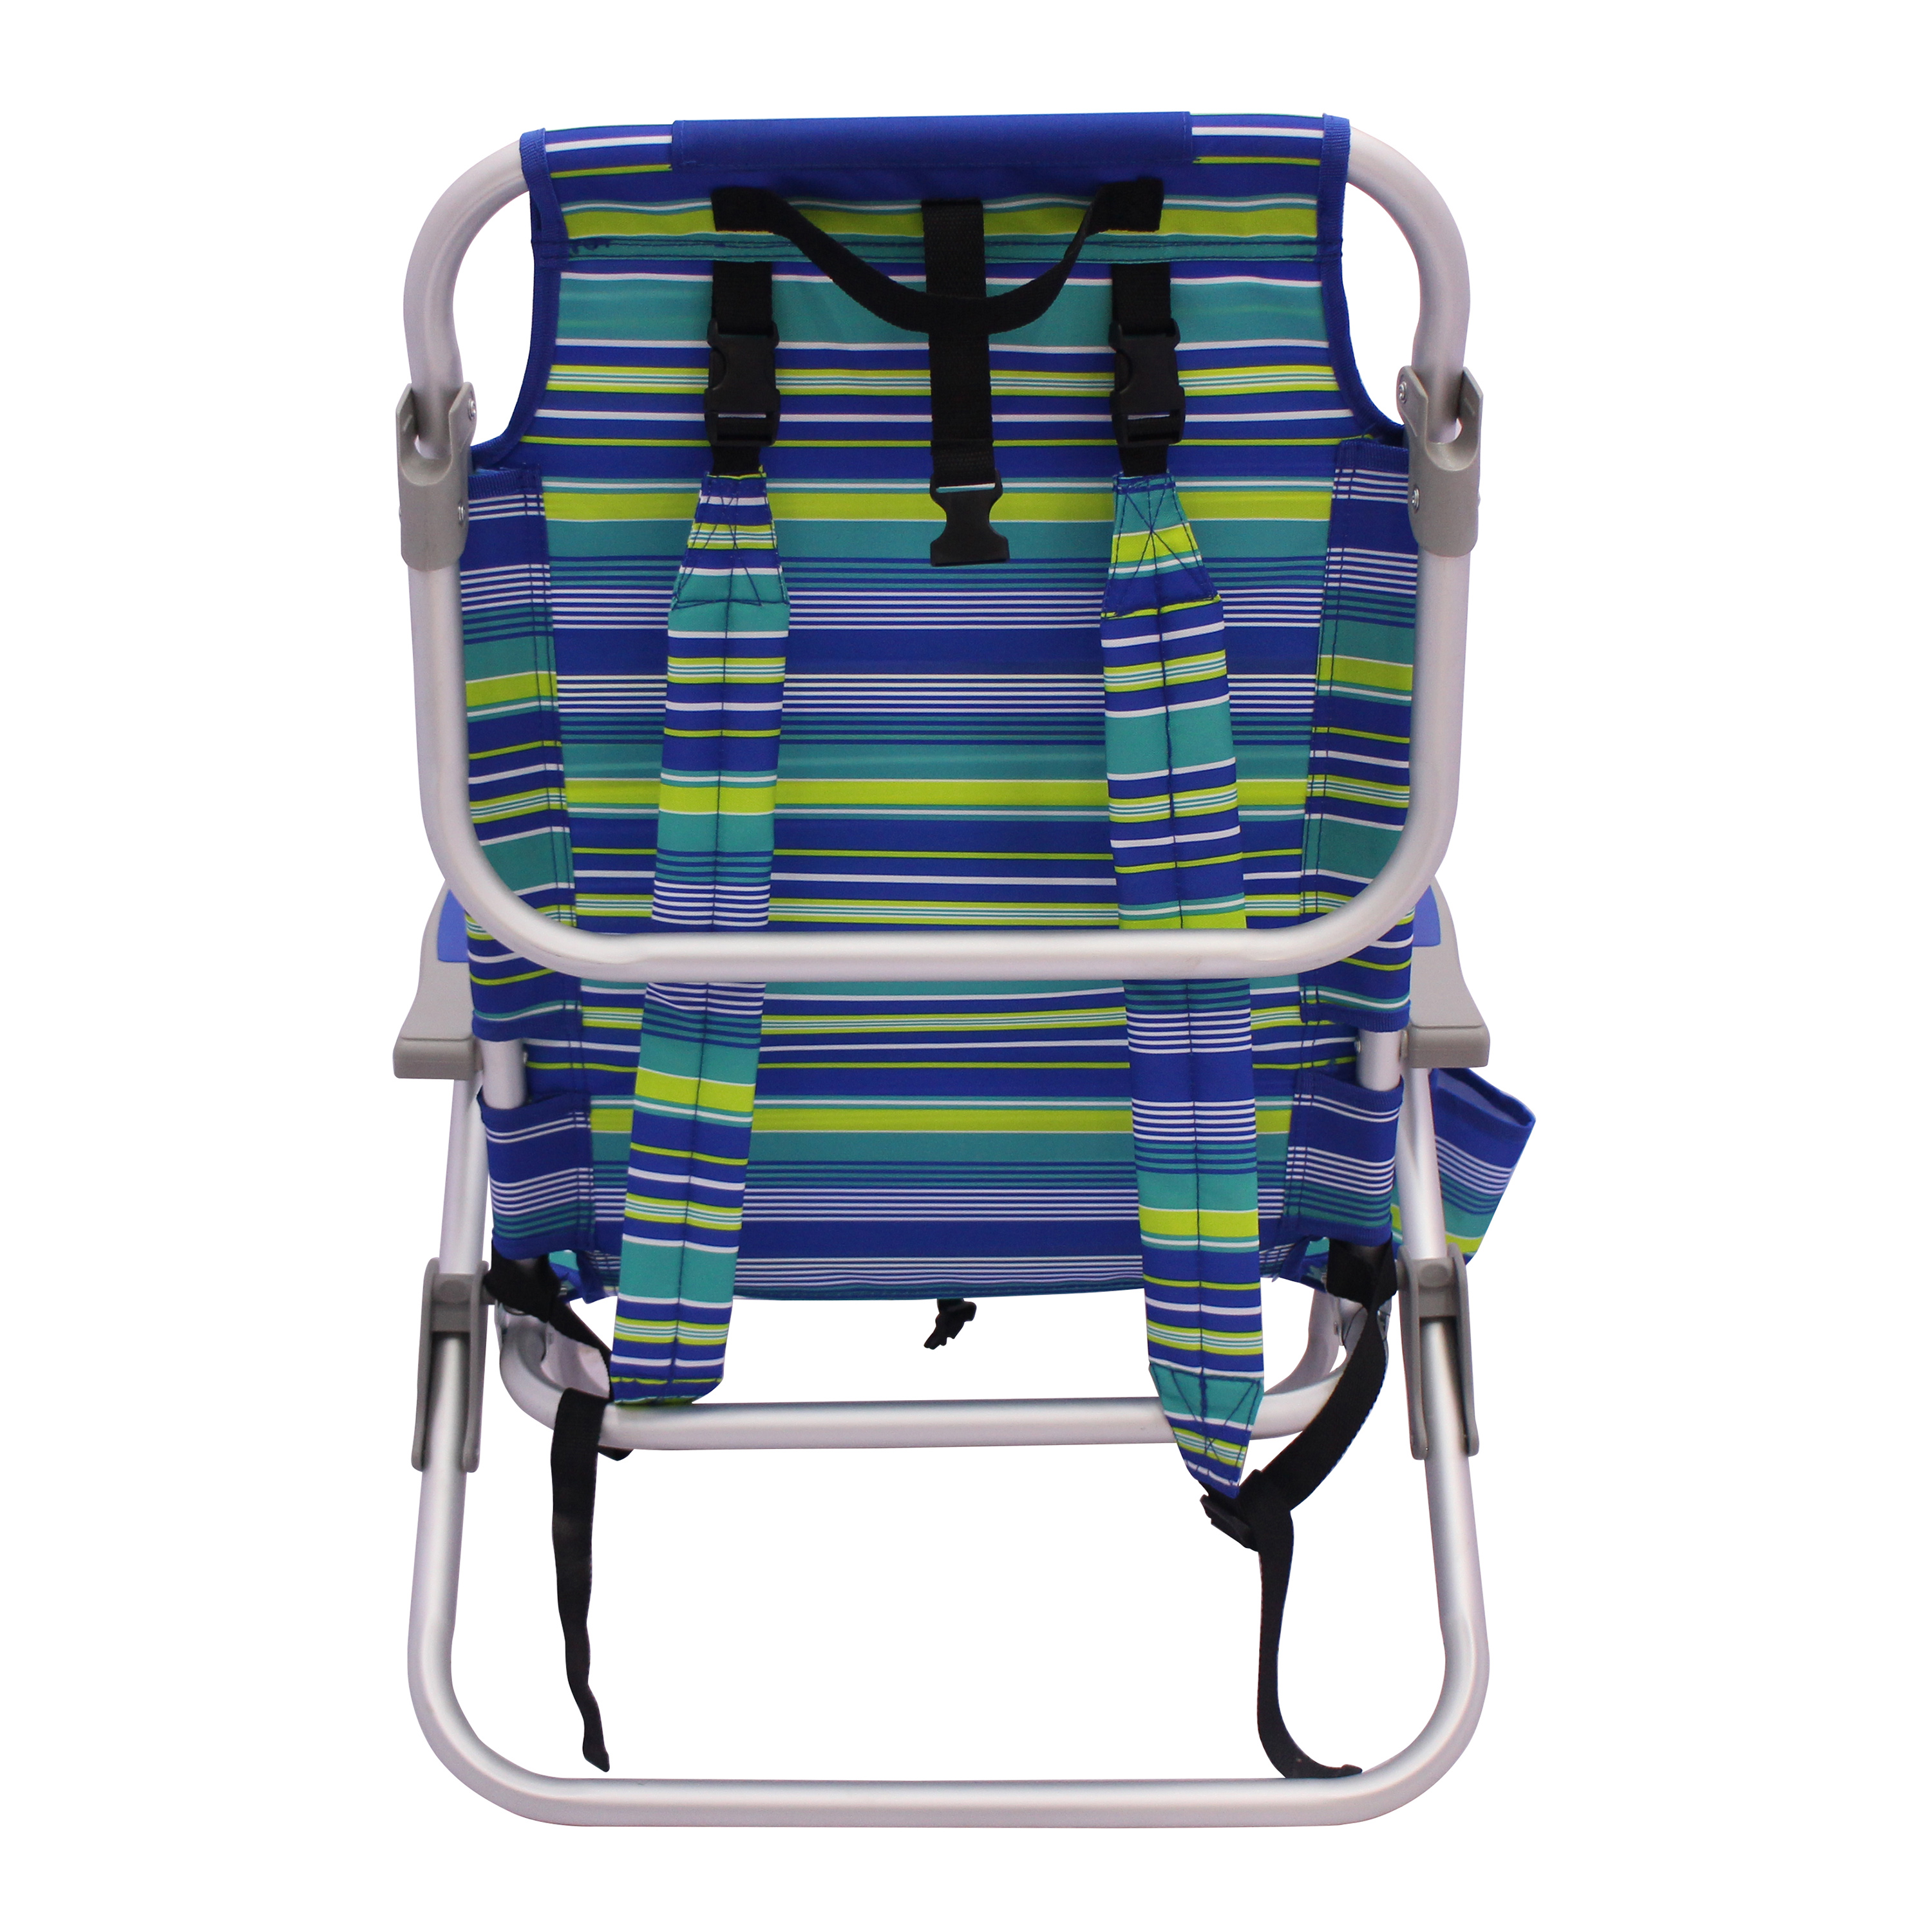 Mainstays Backpack Aluminum Beach Chair, Multi-color - image 4 of 11